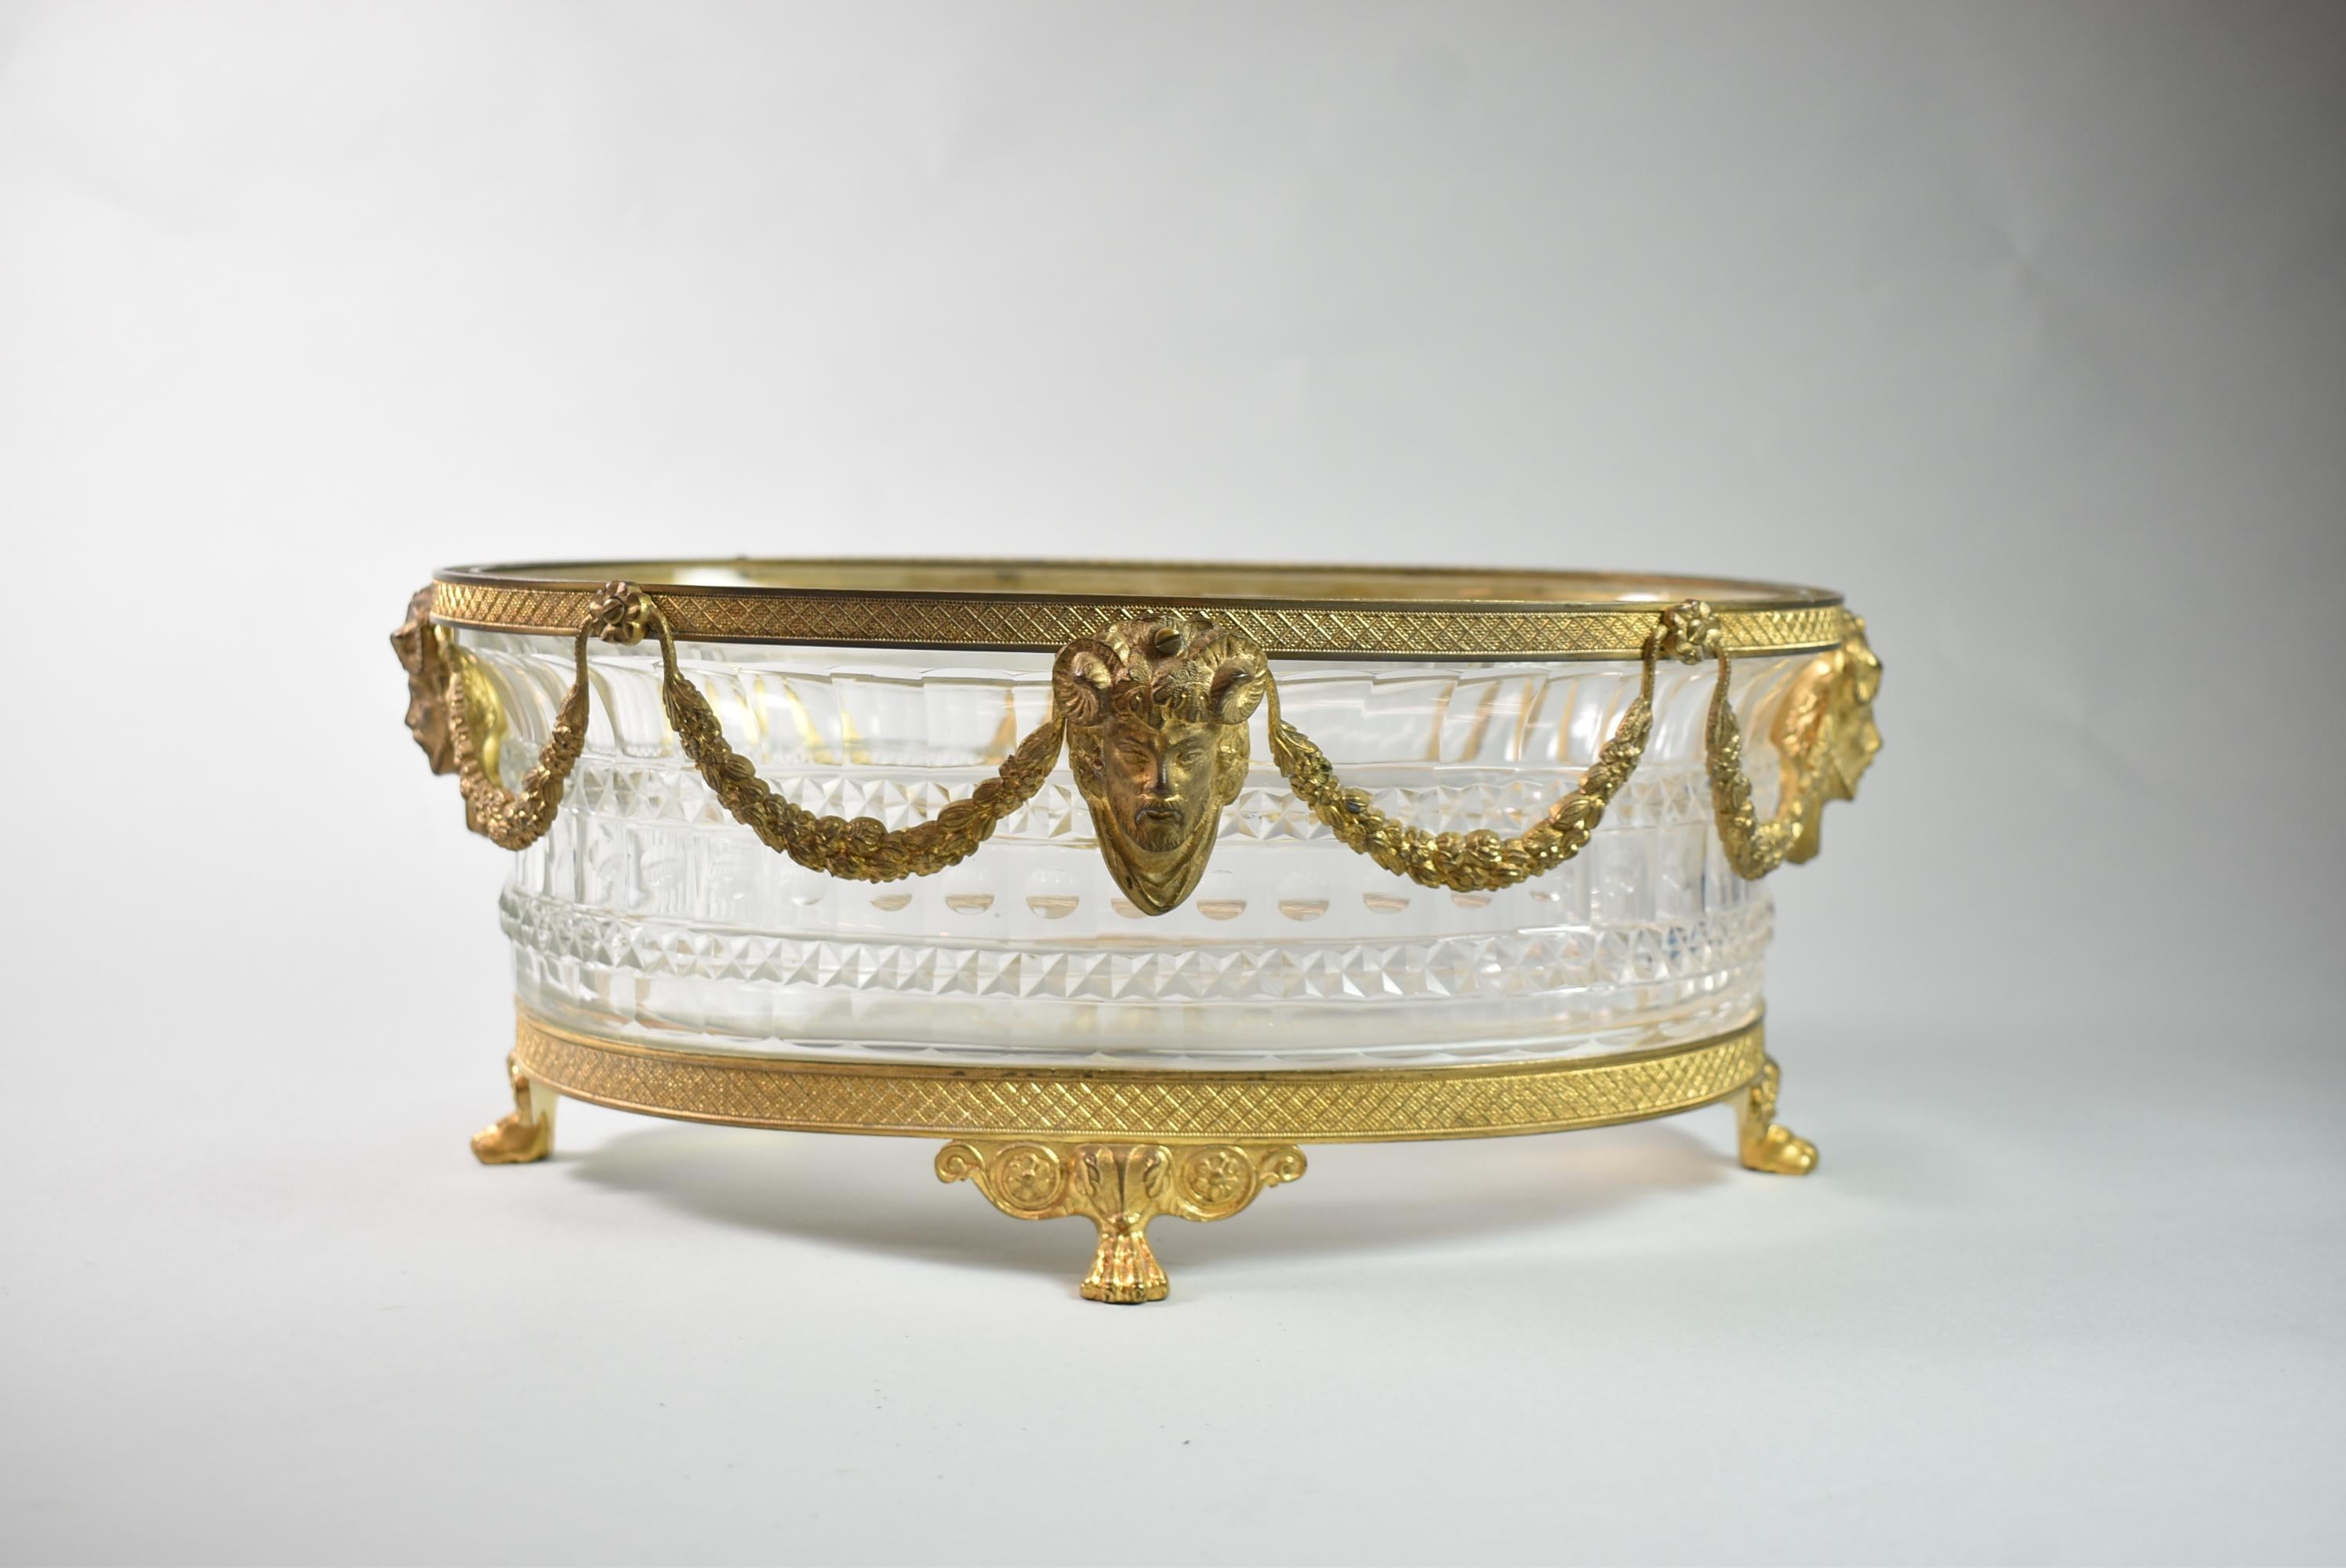 Crystal centerpiece bowl with gilt bronze edge and footed paw base, featuring figural goat and man fauns, cut crystal Dore, Austrian. Very good to excellent condition. Dimensions: 9